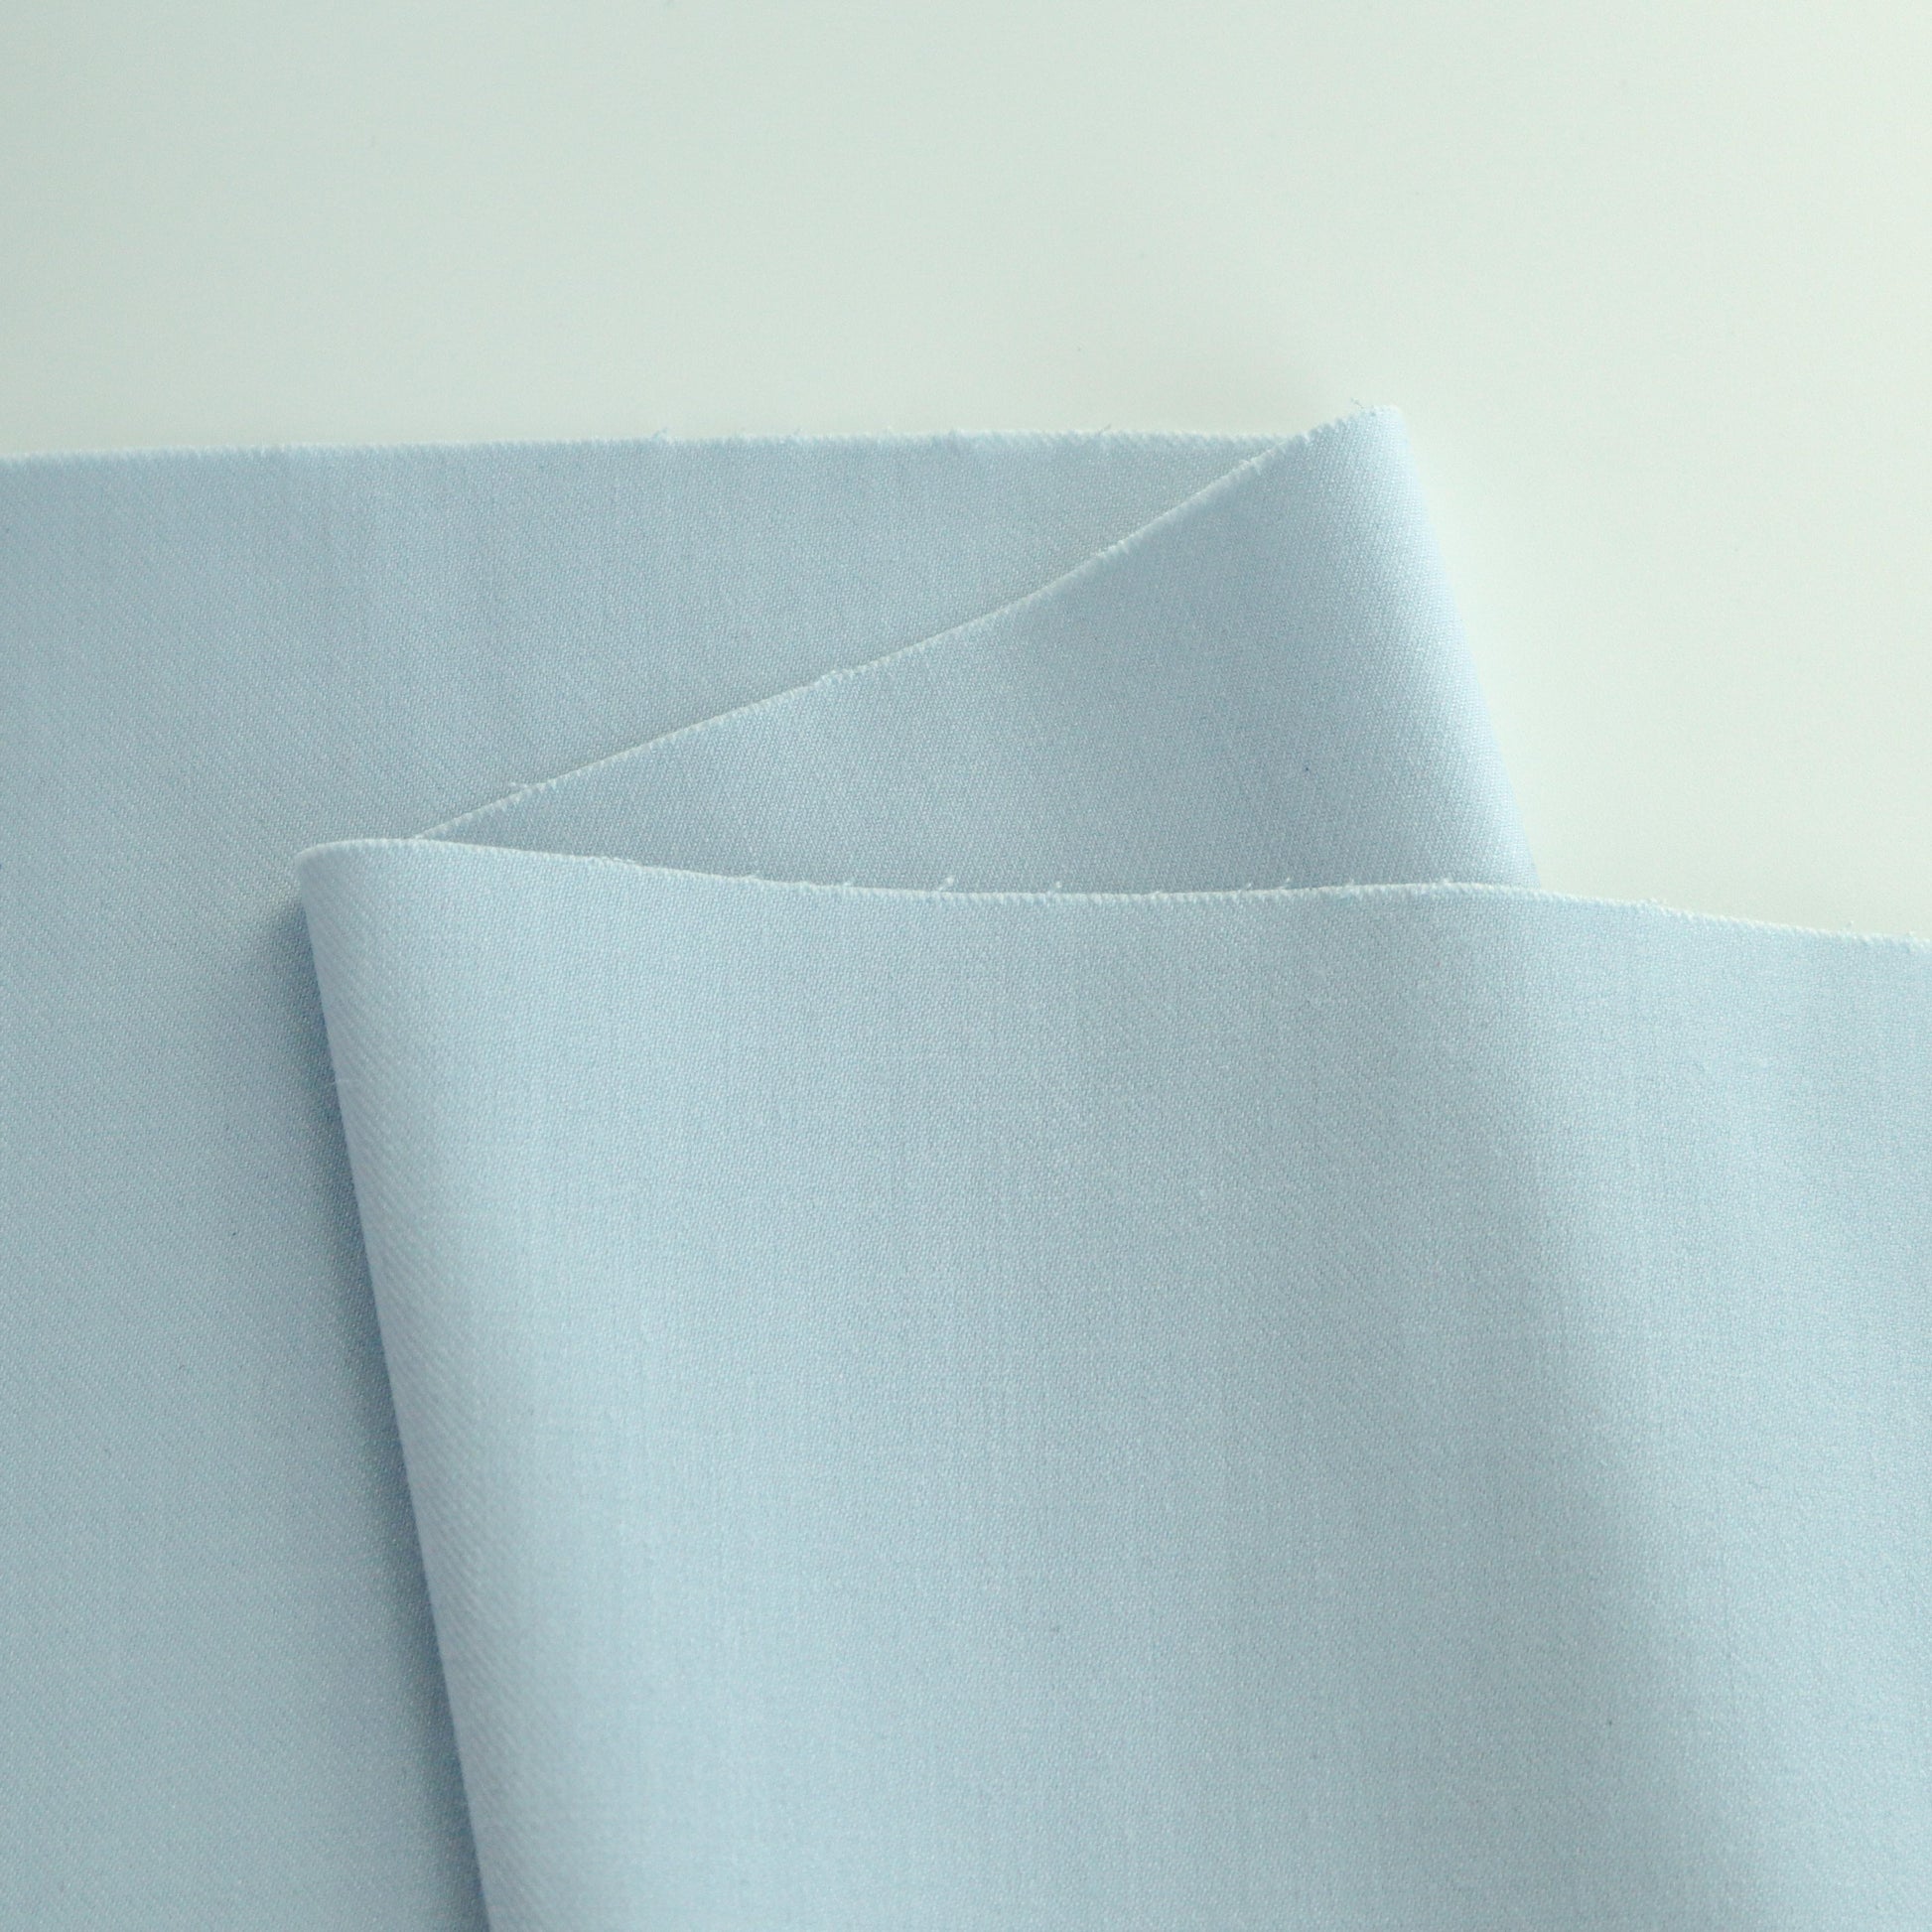 Midweight Solid fabric in Artic Ice (blue)